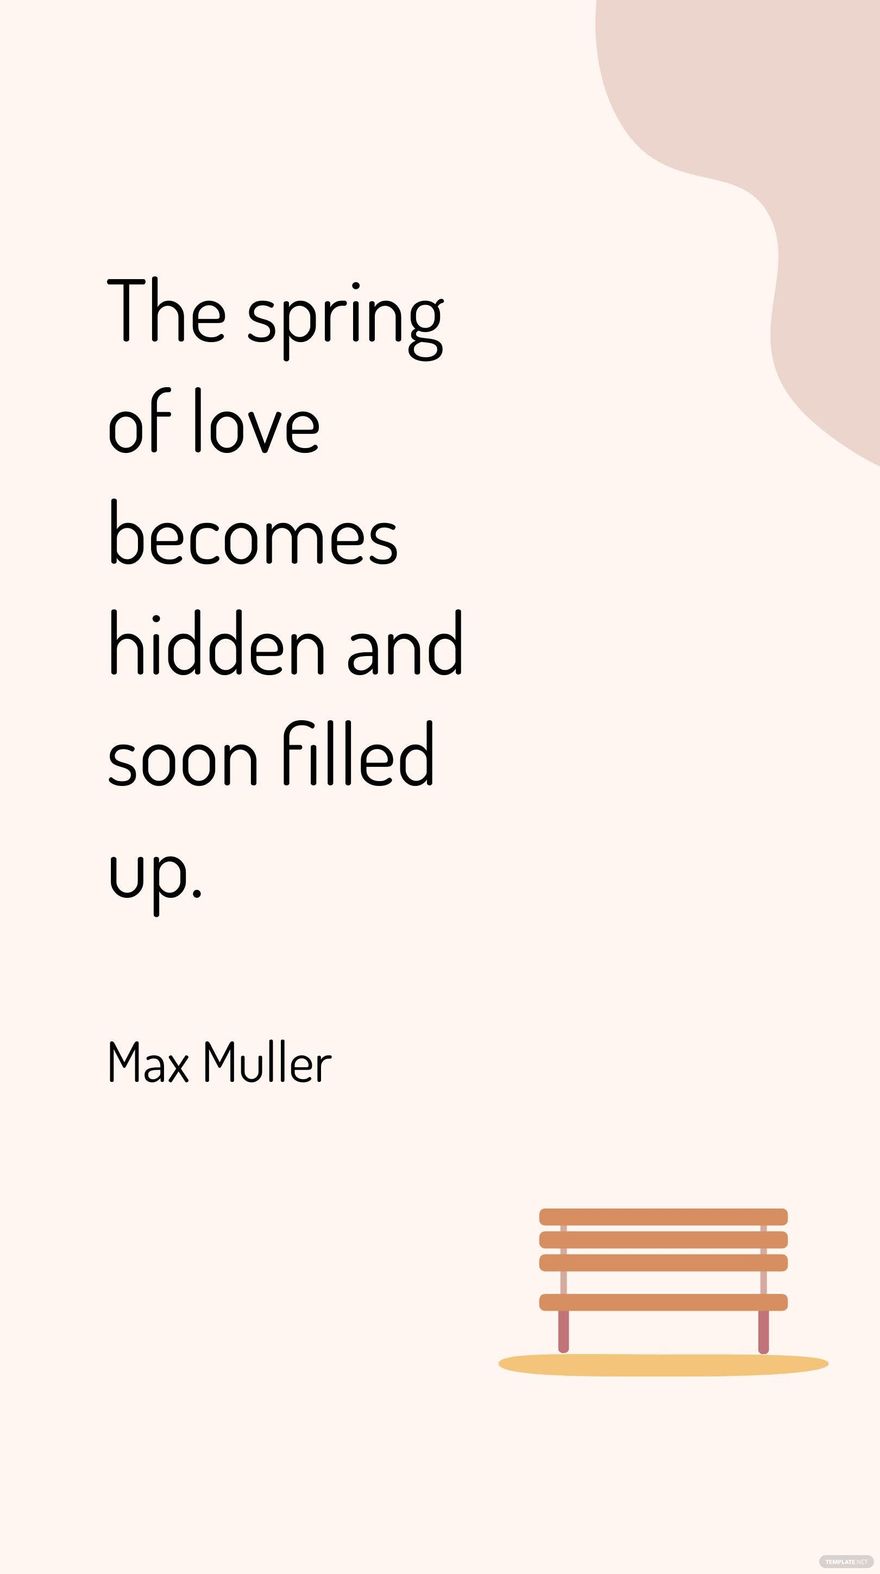 Max Muller - The spring of love becomes hidden and soon filled up.